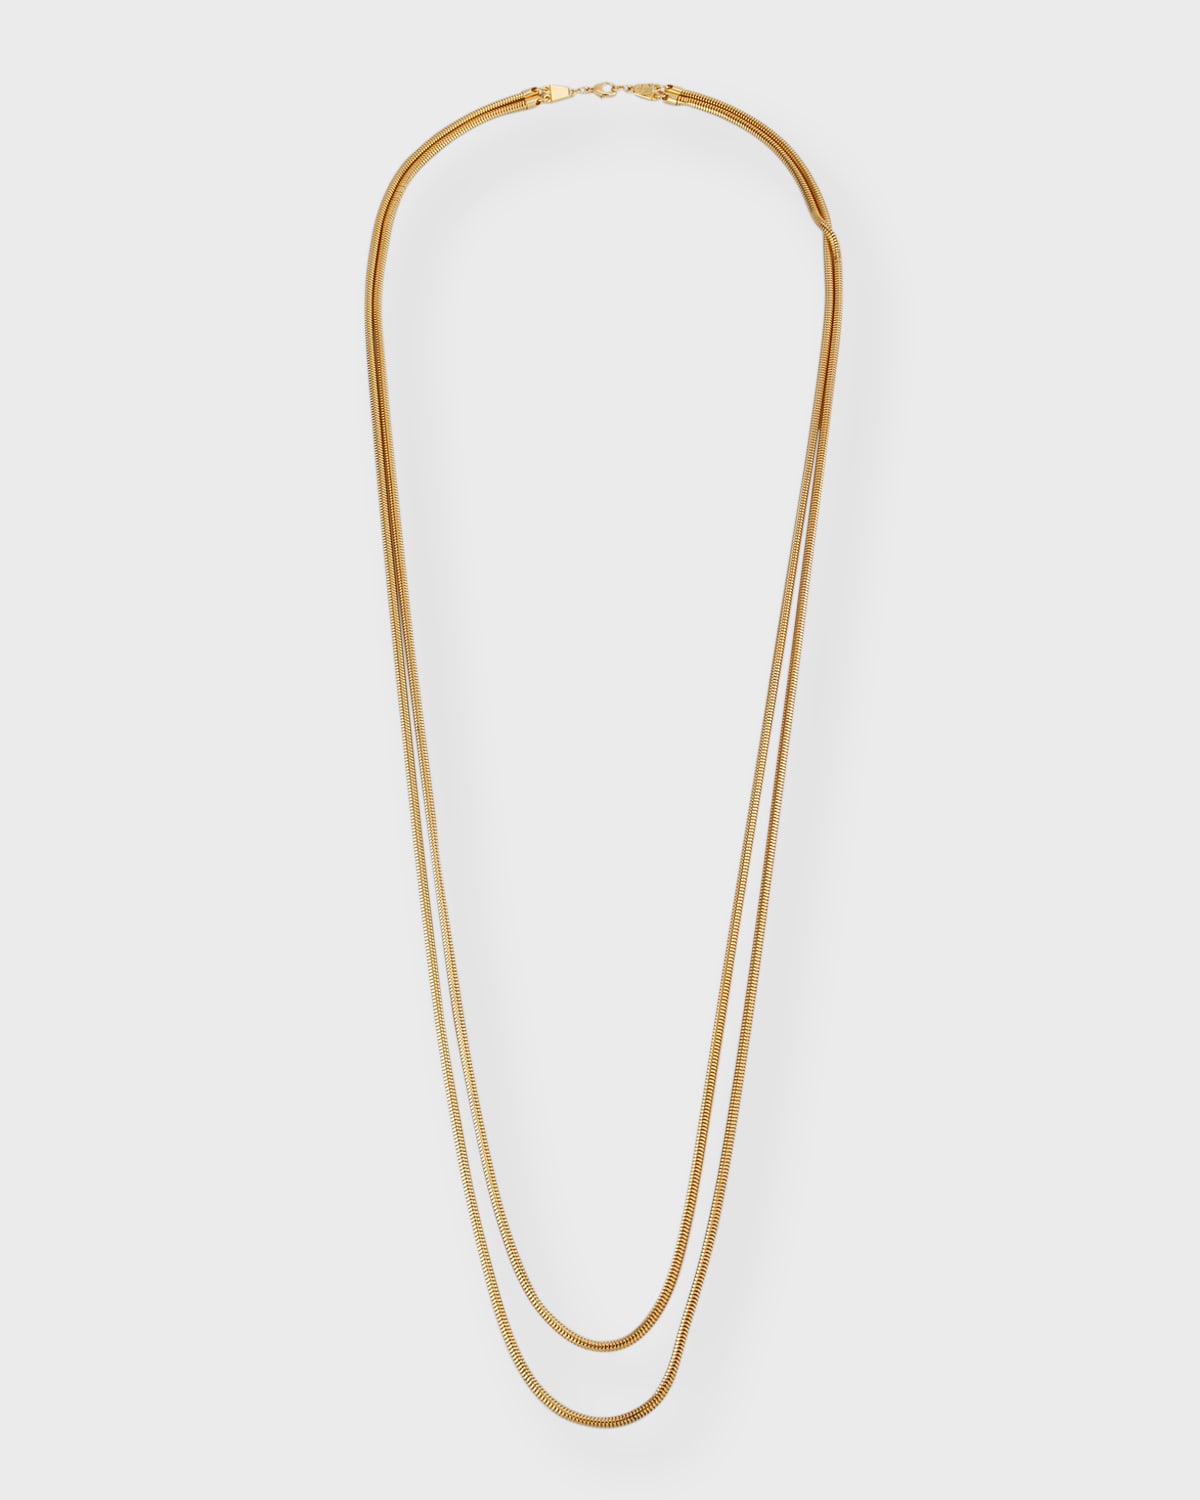 Ben-Amun 24k Gold Electroplated Snake Chain Necklace | Neiman Marcus